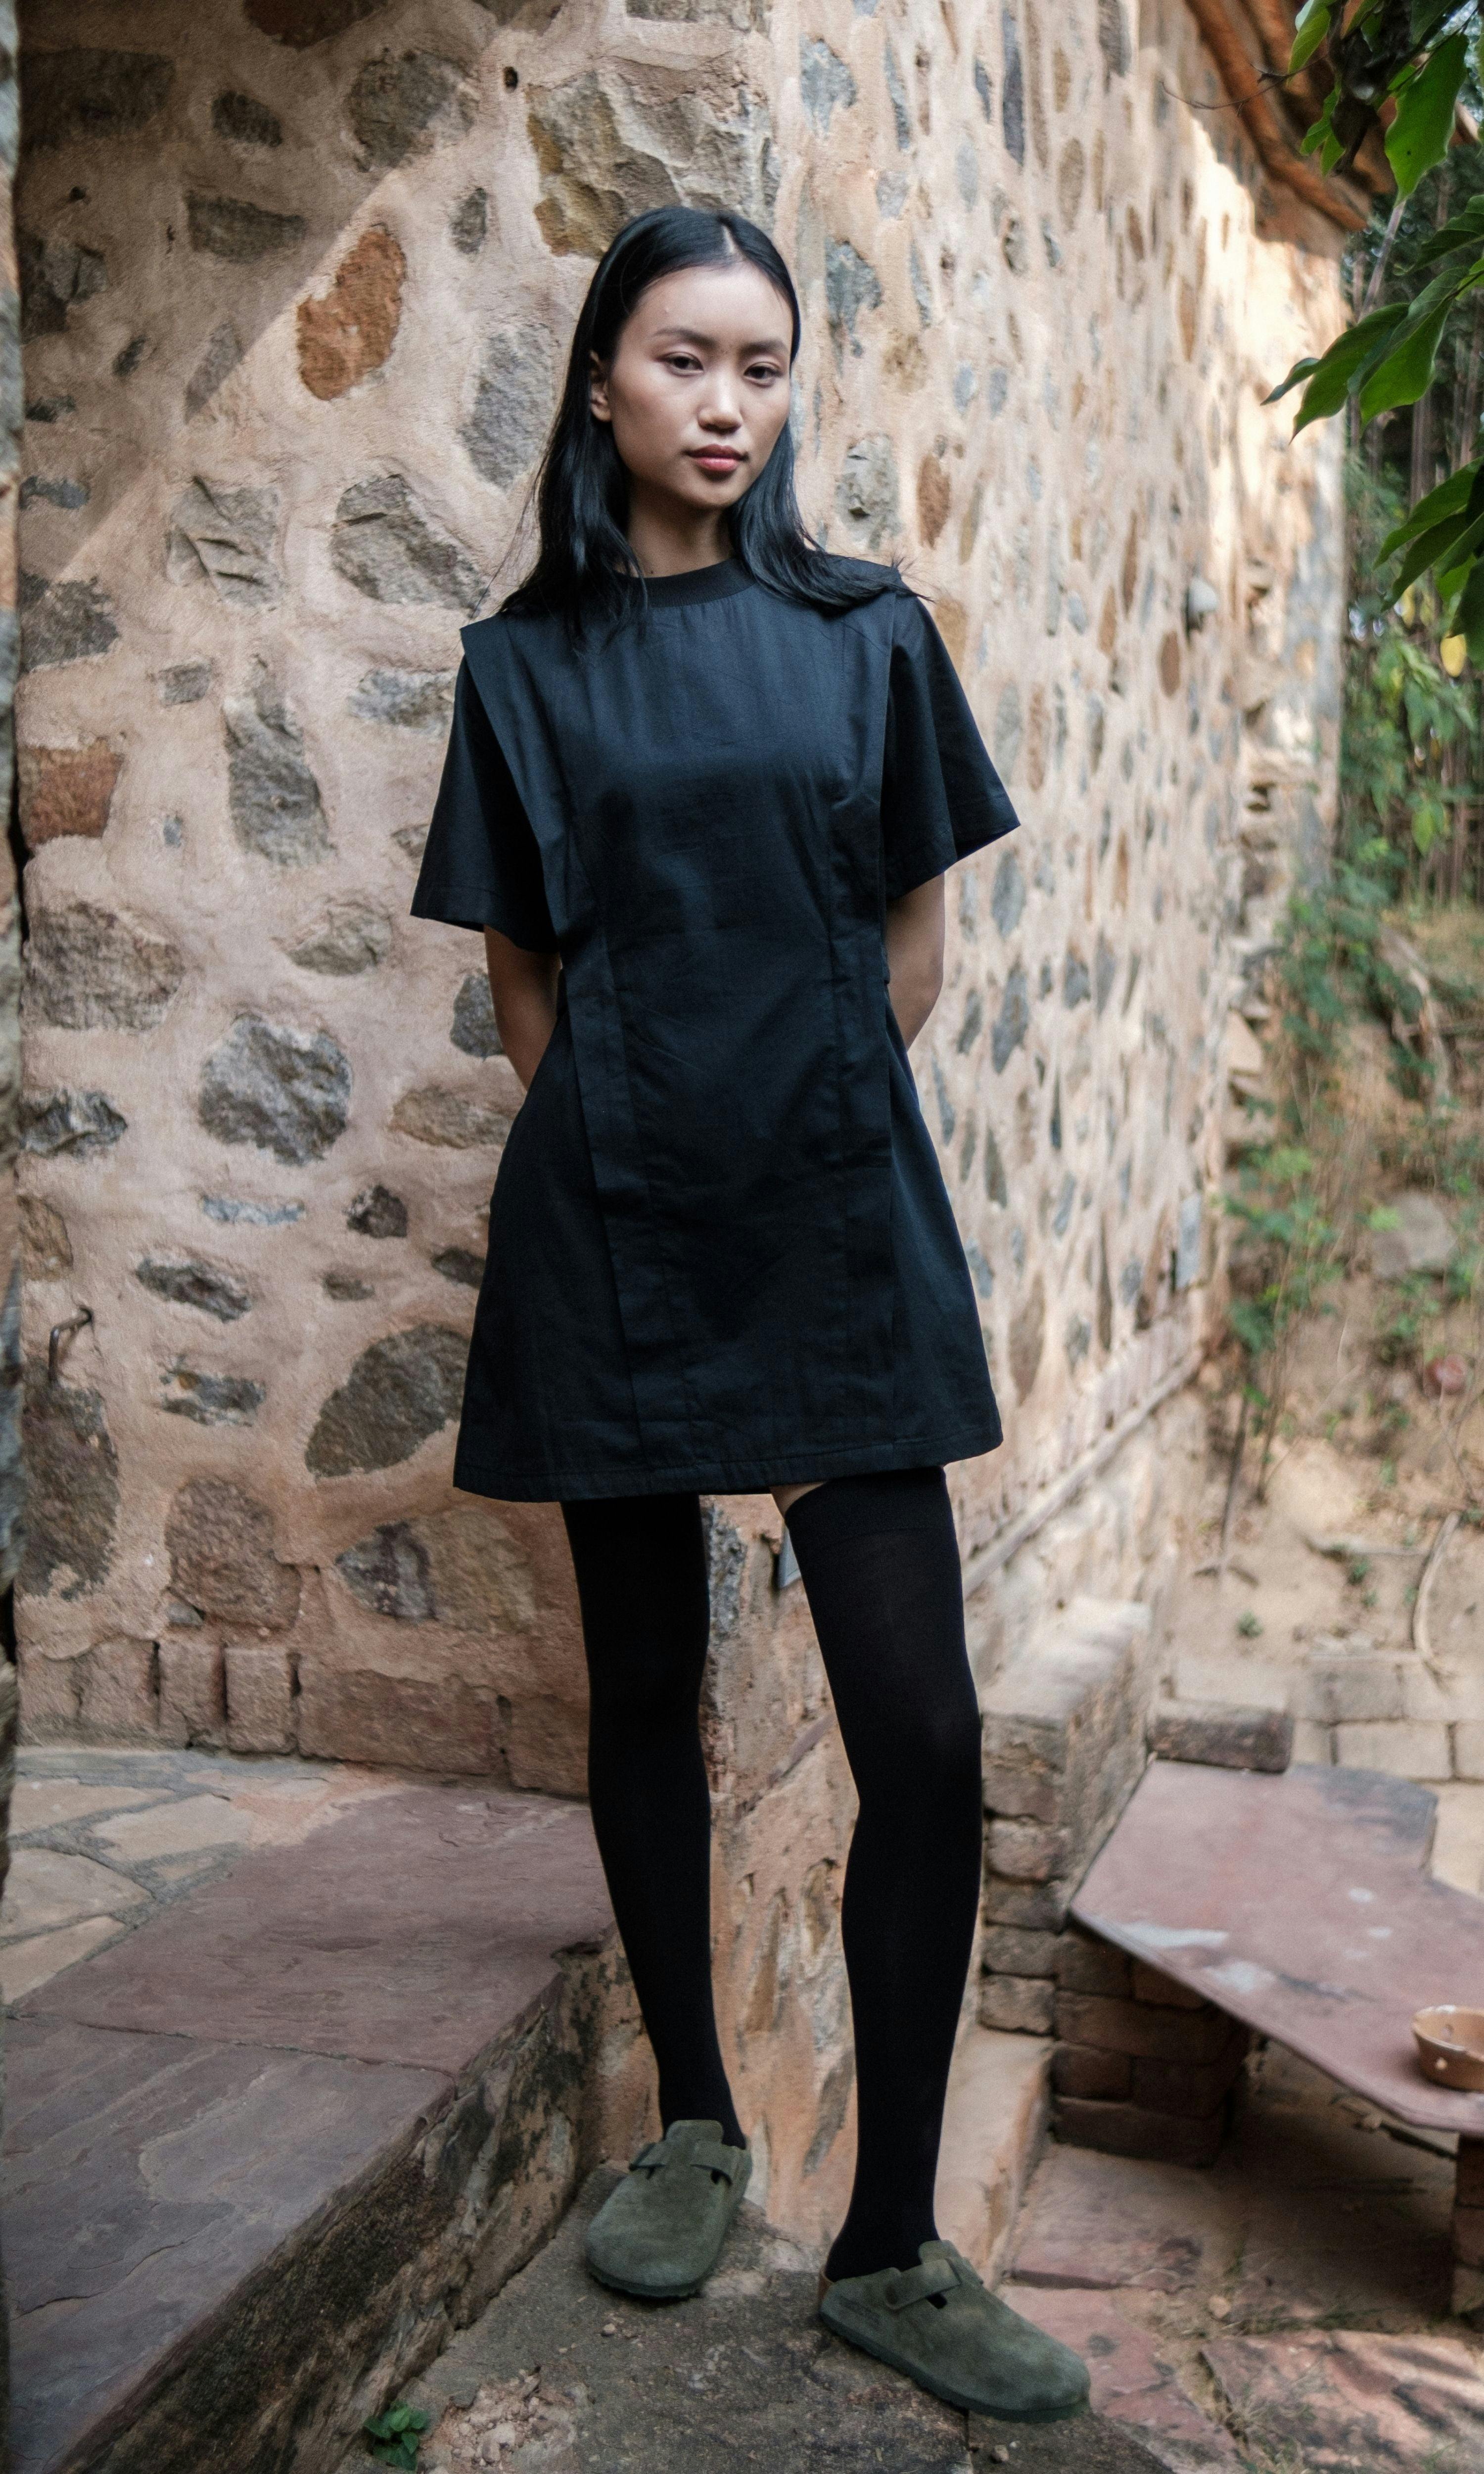 Rory Rib Dress, a product by The Terra Tribe